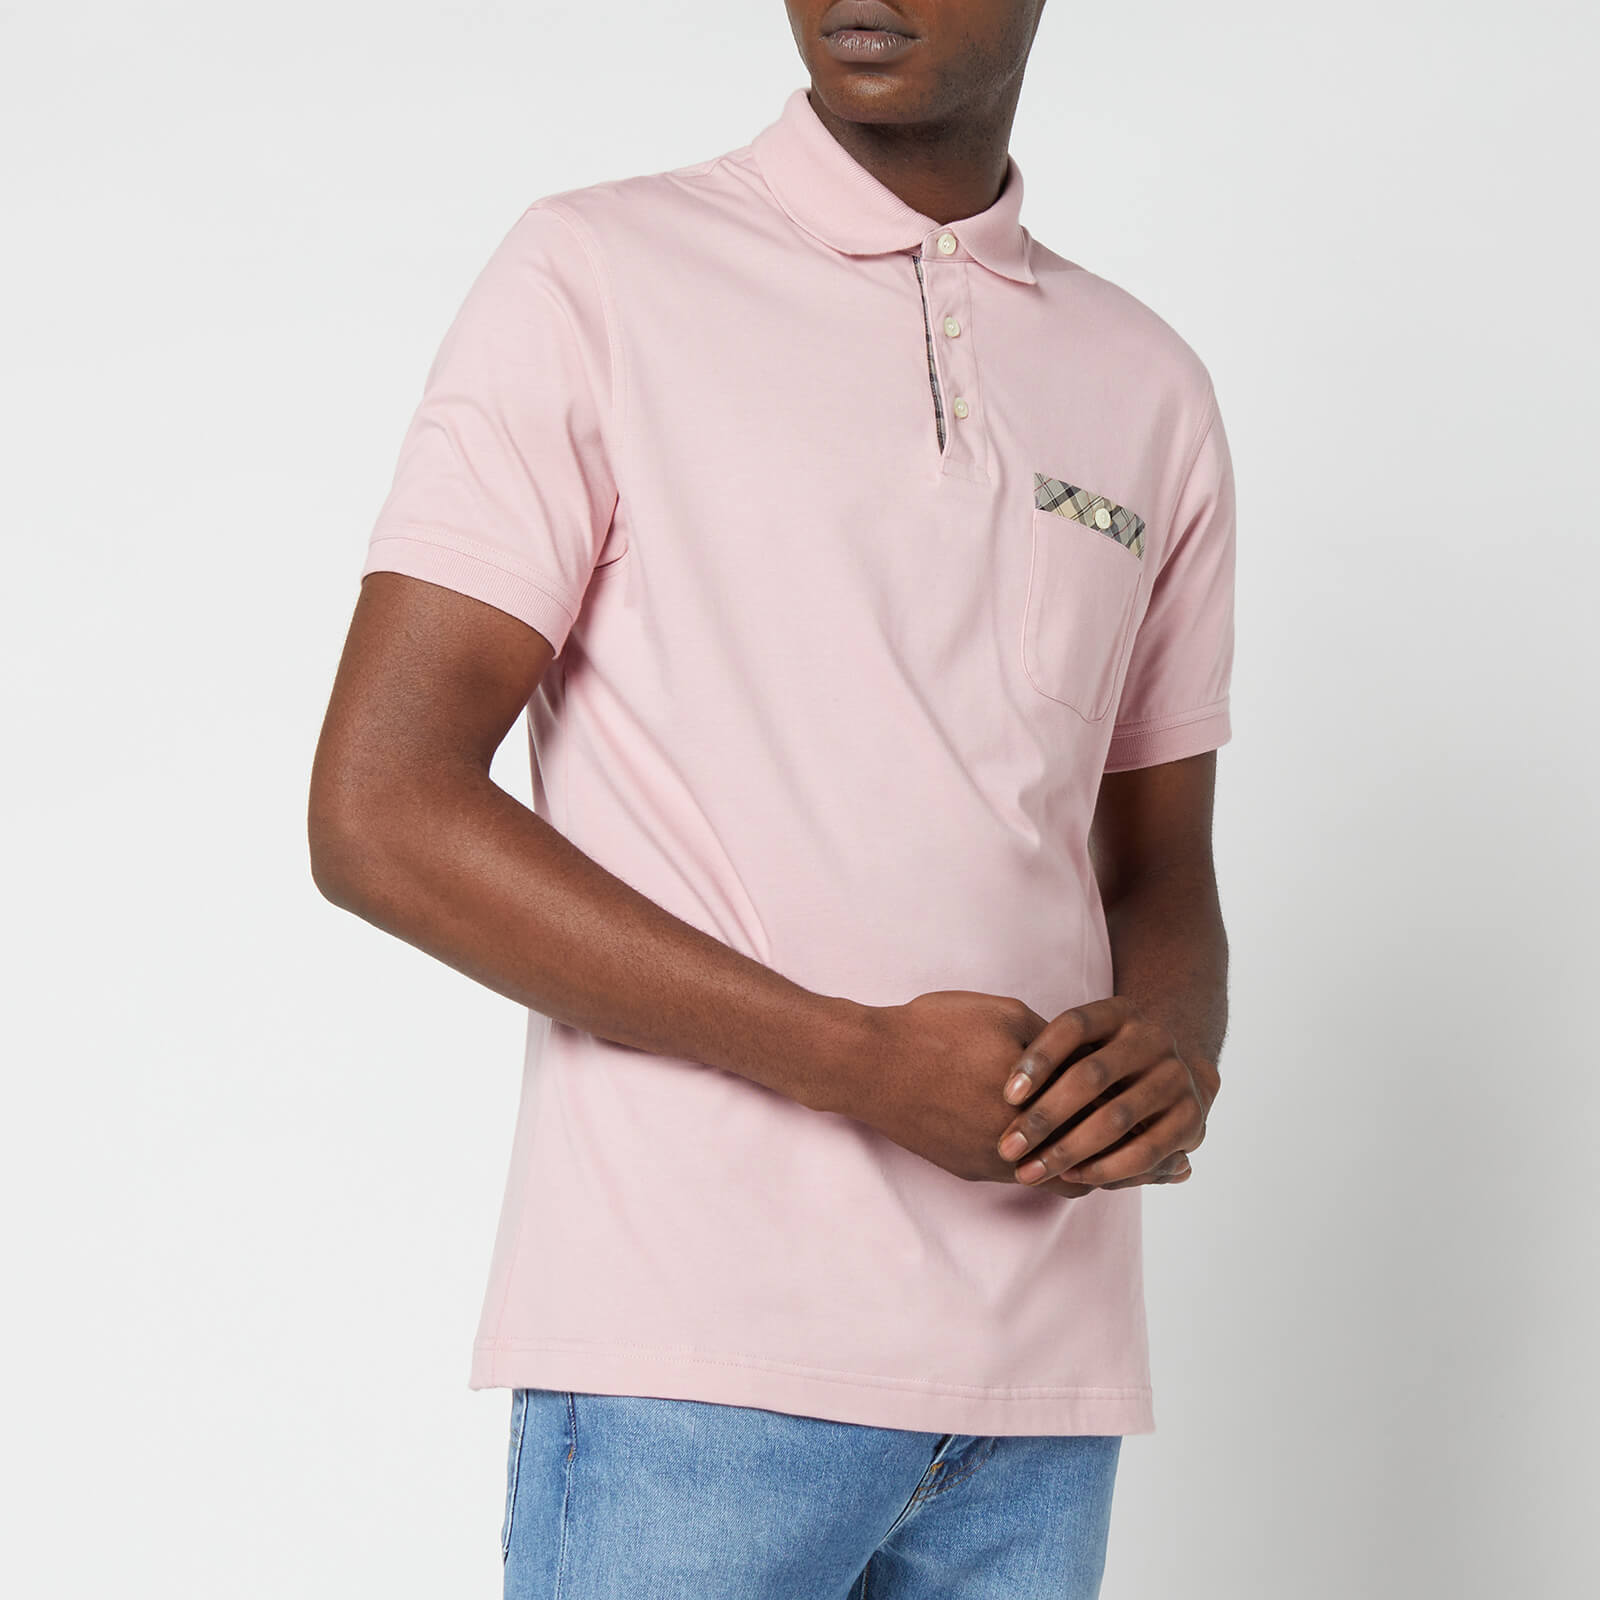 Barbour Men's Hirst Pocket Polo Shirt - Faded Pink - S